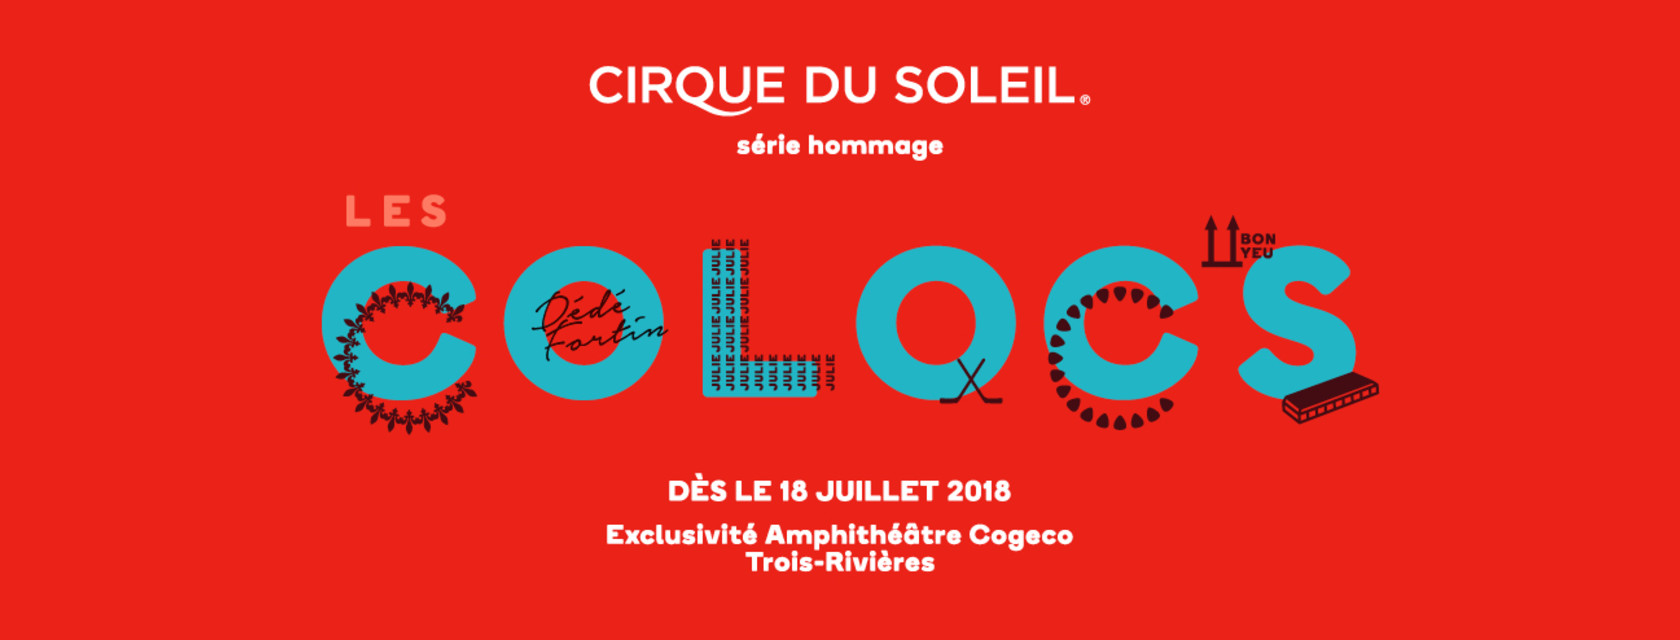 A fourth year for the Tribute Series by Cirque du Soleil inspired by a legendary Quebec music band